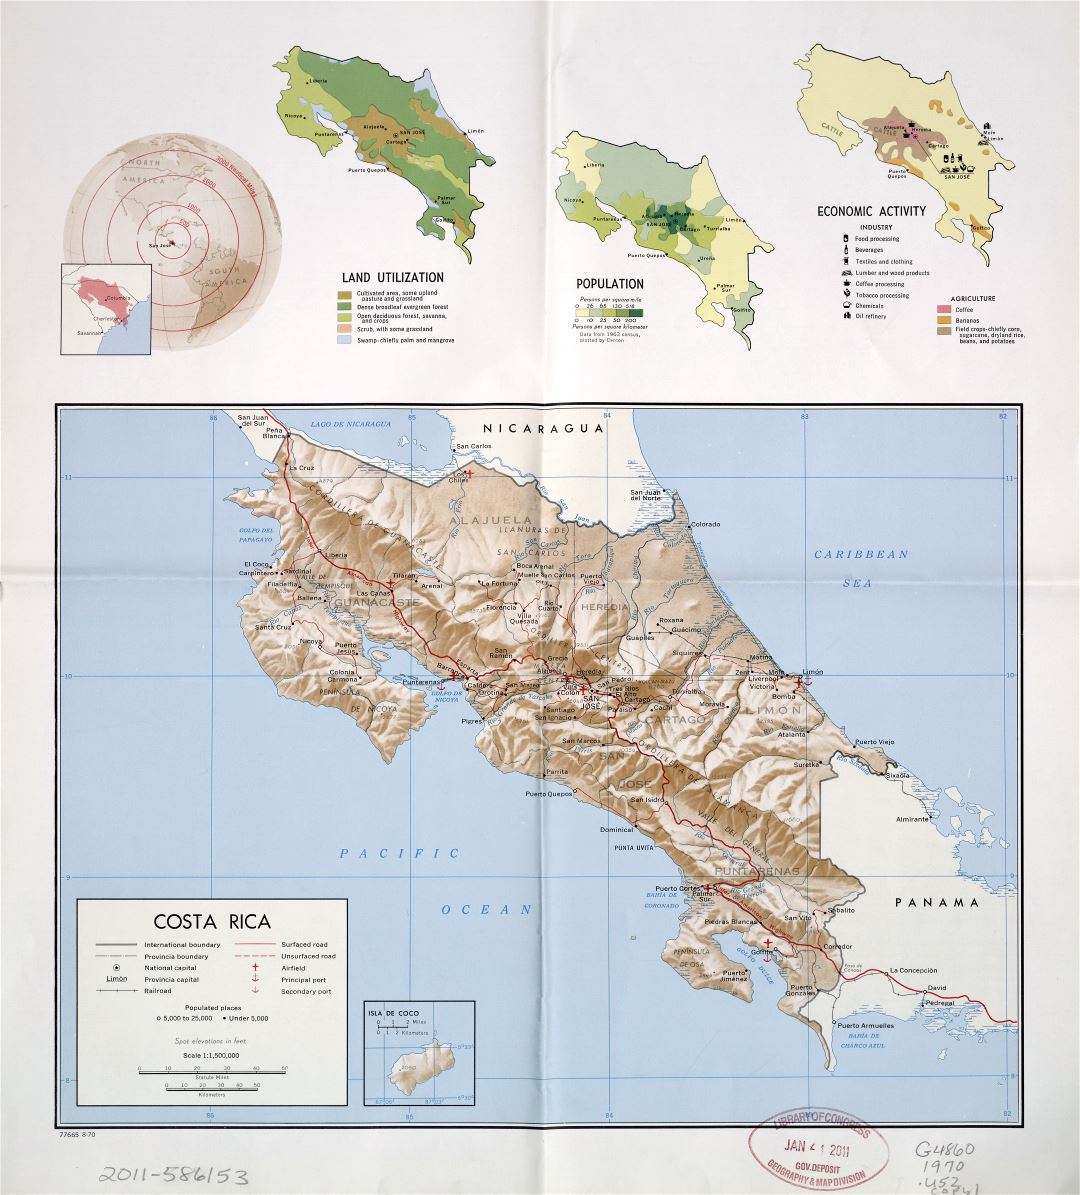 Large scale country profile map of Costa Rica - 1970